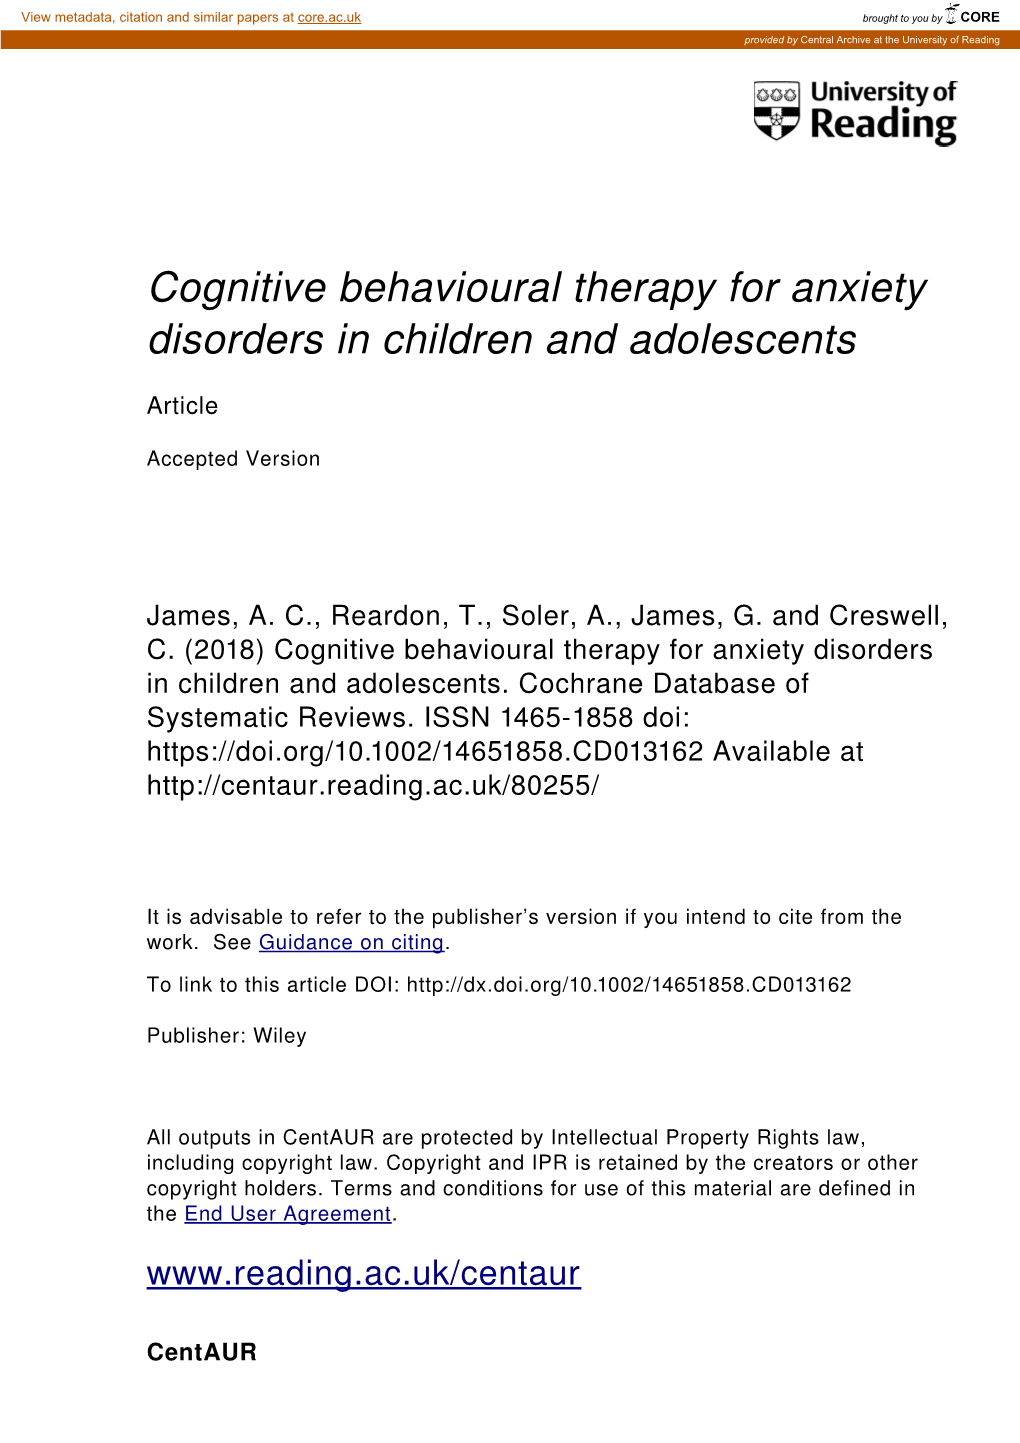 Cognitive Behavioural Therapy for Anxiety Disorders in Children and Adolescents